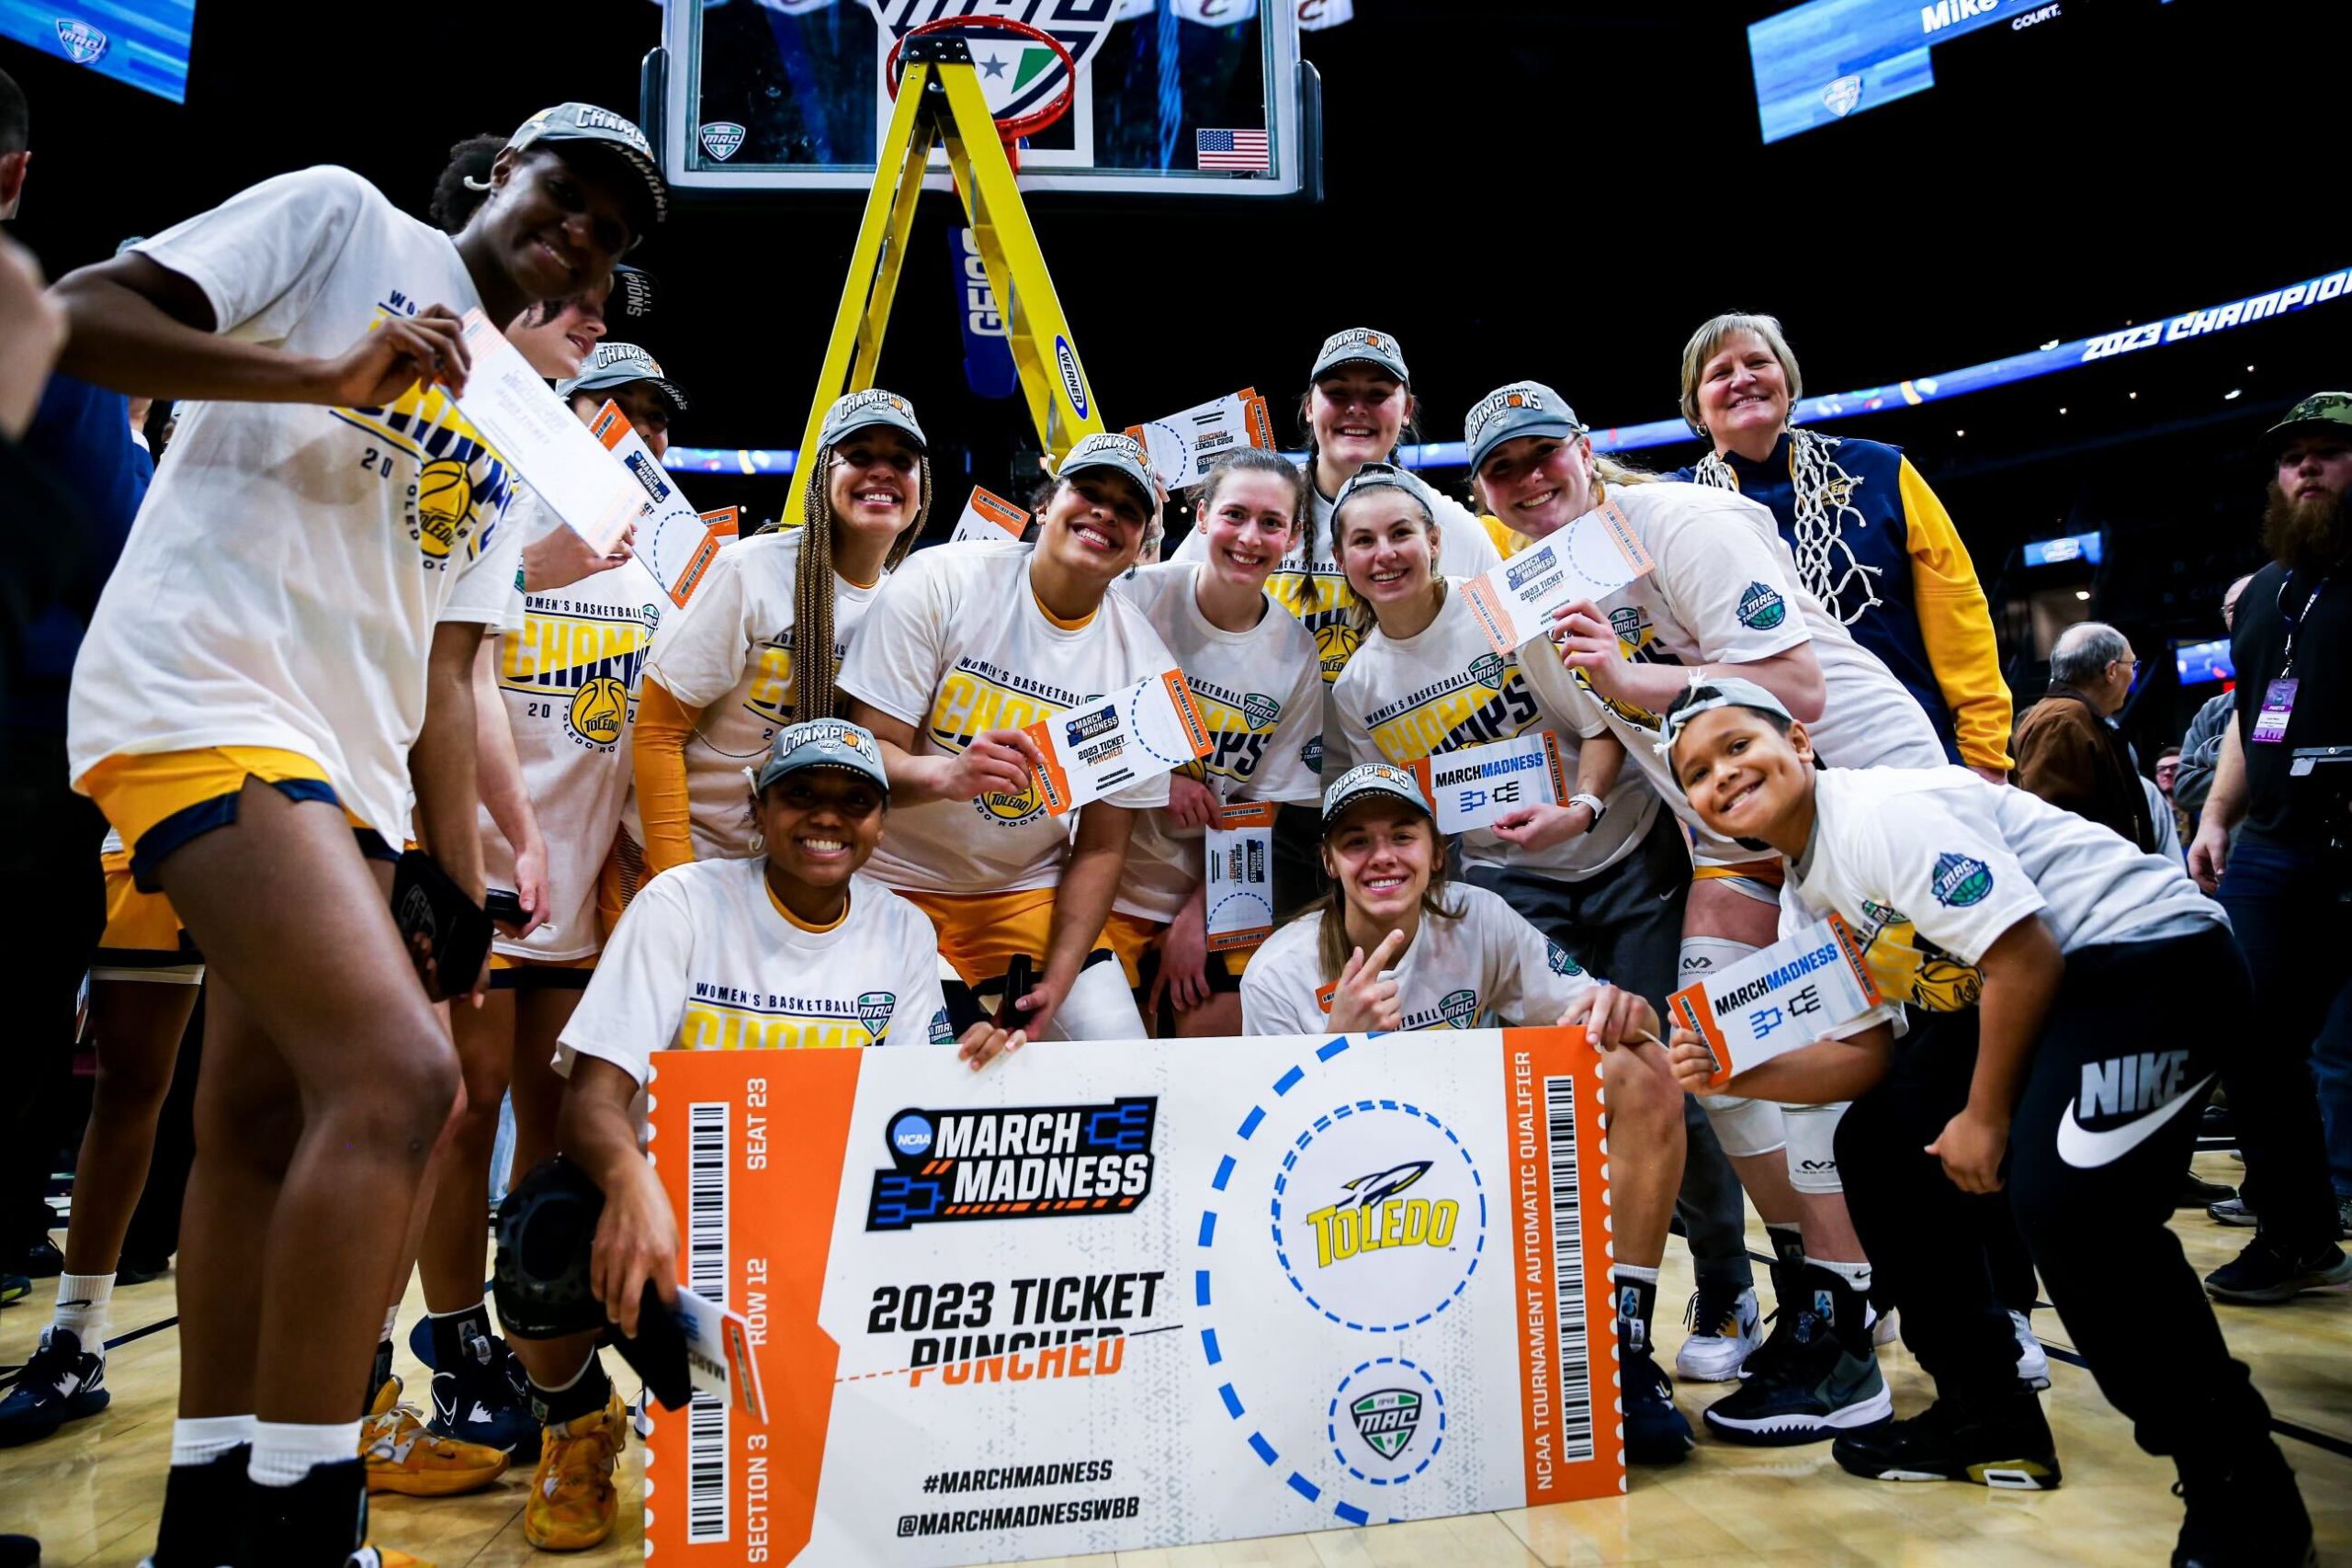 Women's Basketball Players celebrate winning the MAC tournament with a Ticket Punched sign